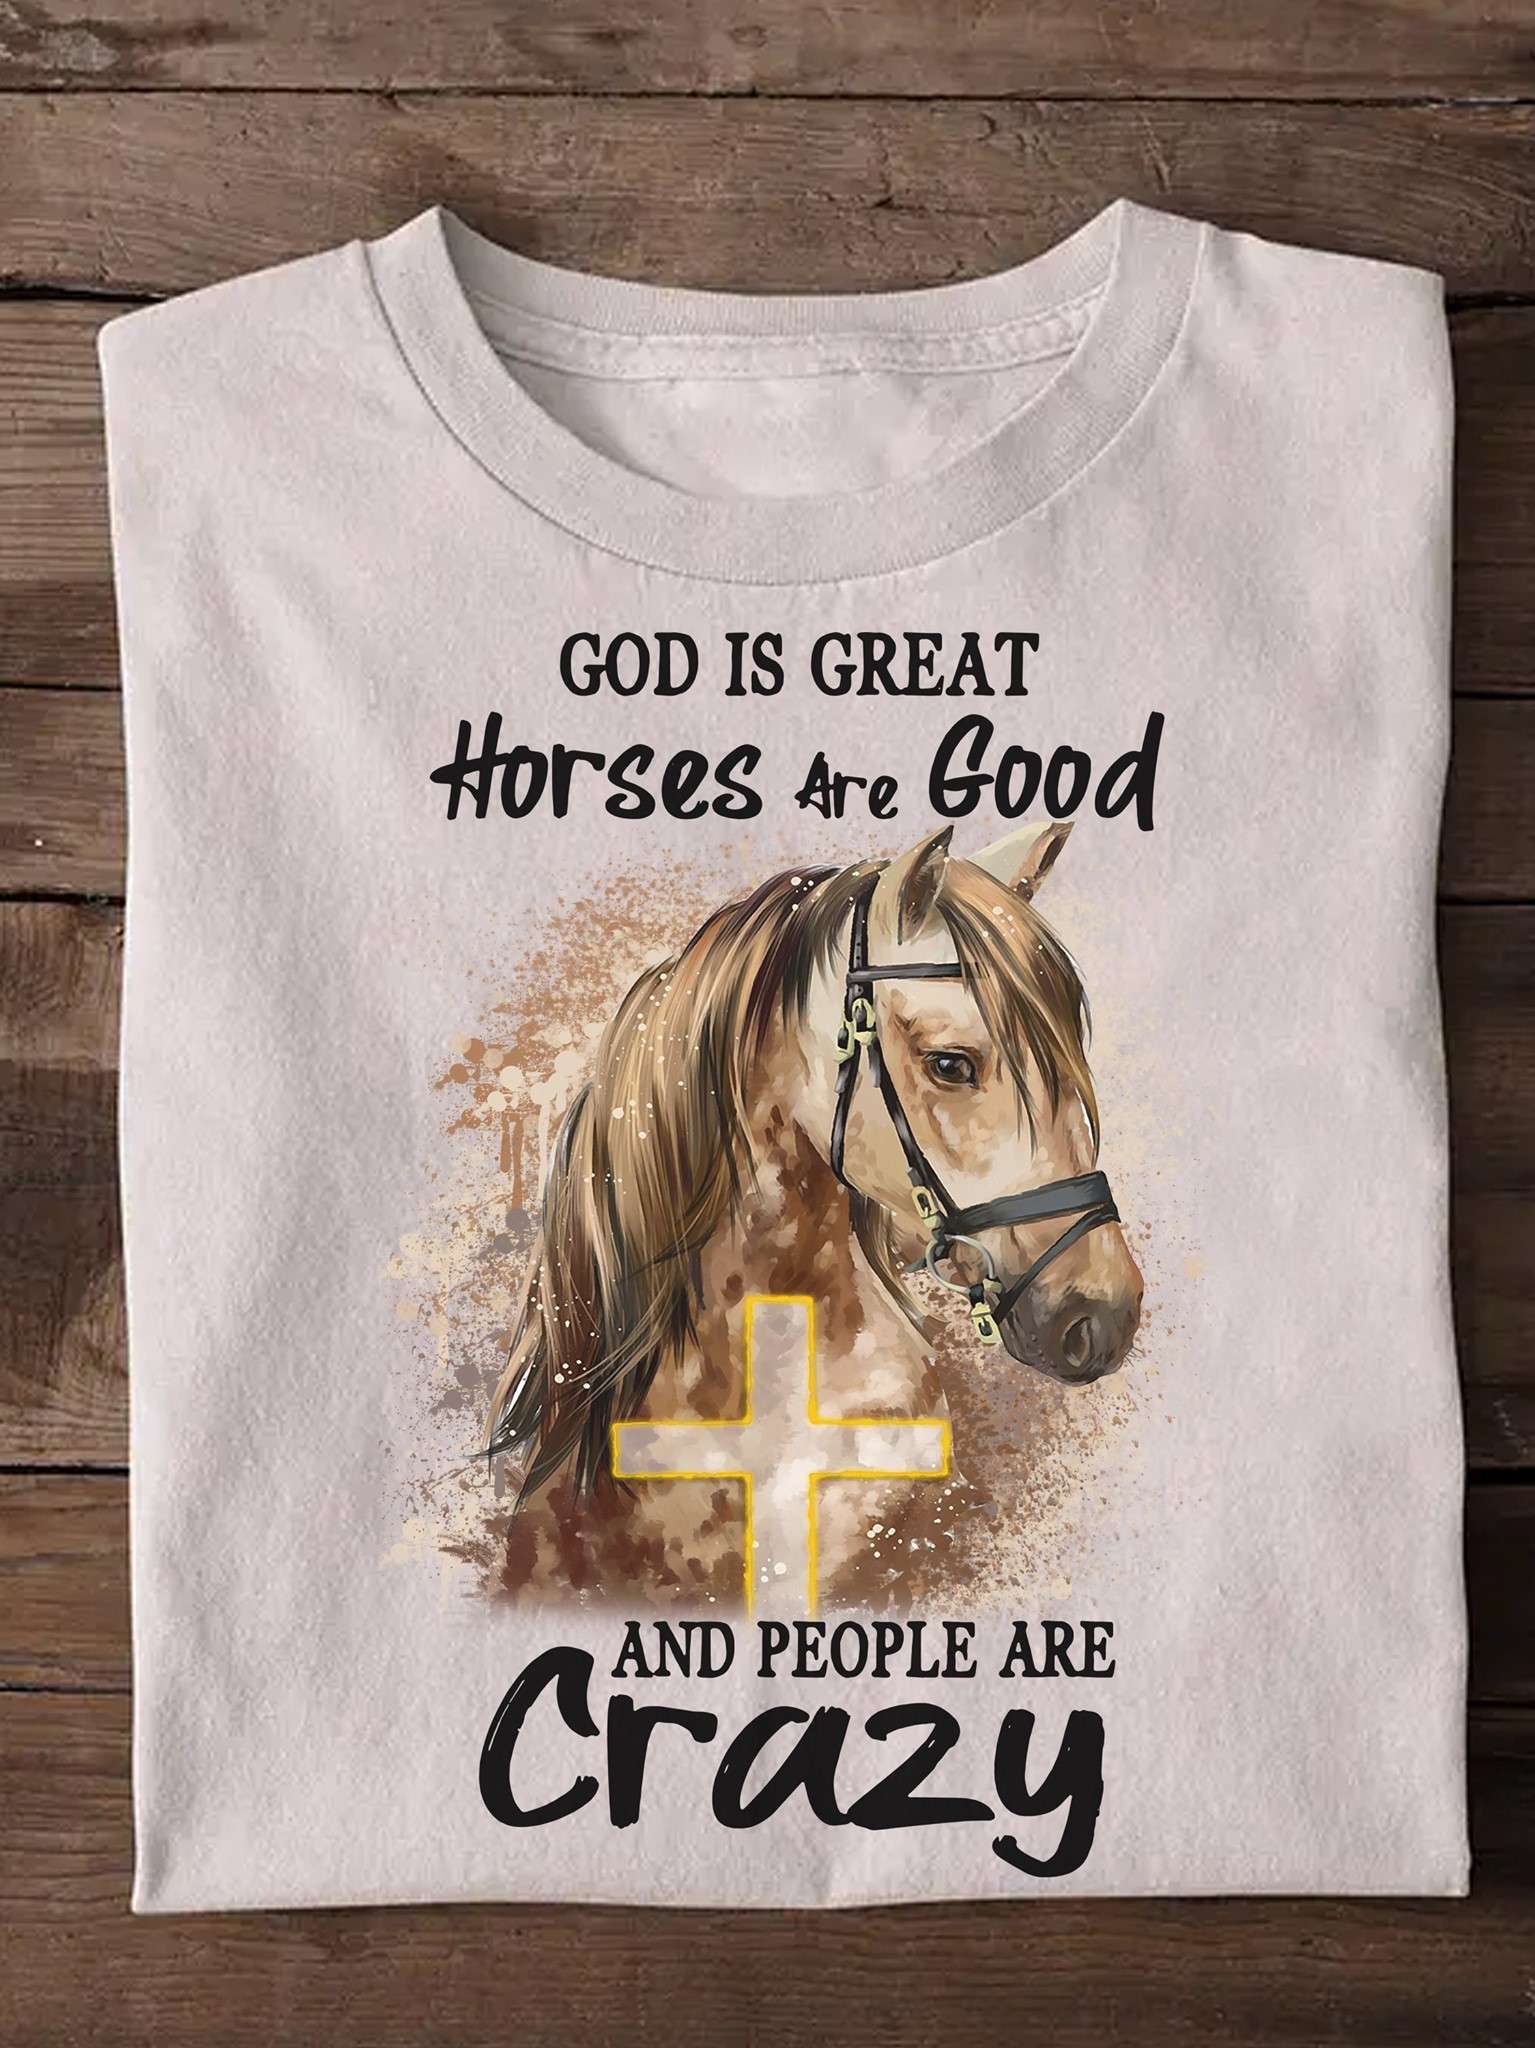 God is great, horses are good and people are crazy - Jesus and horse lover